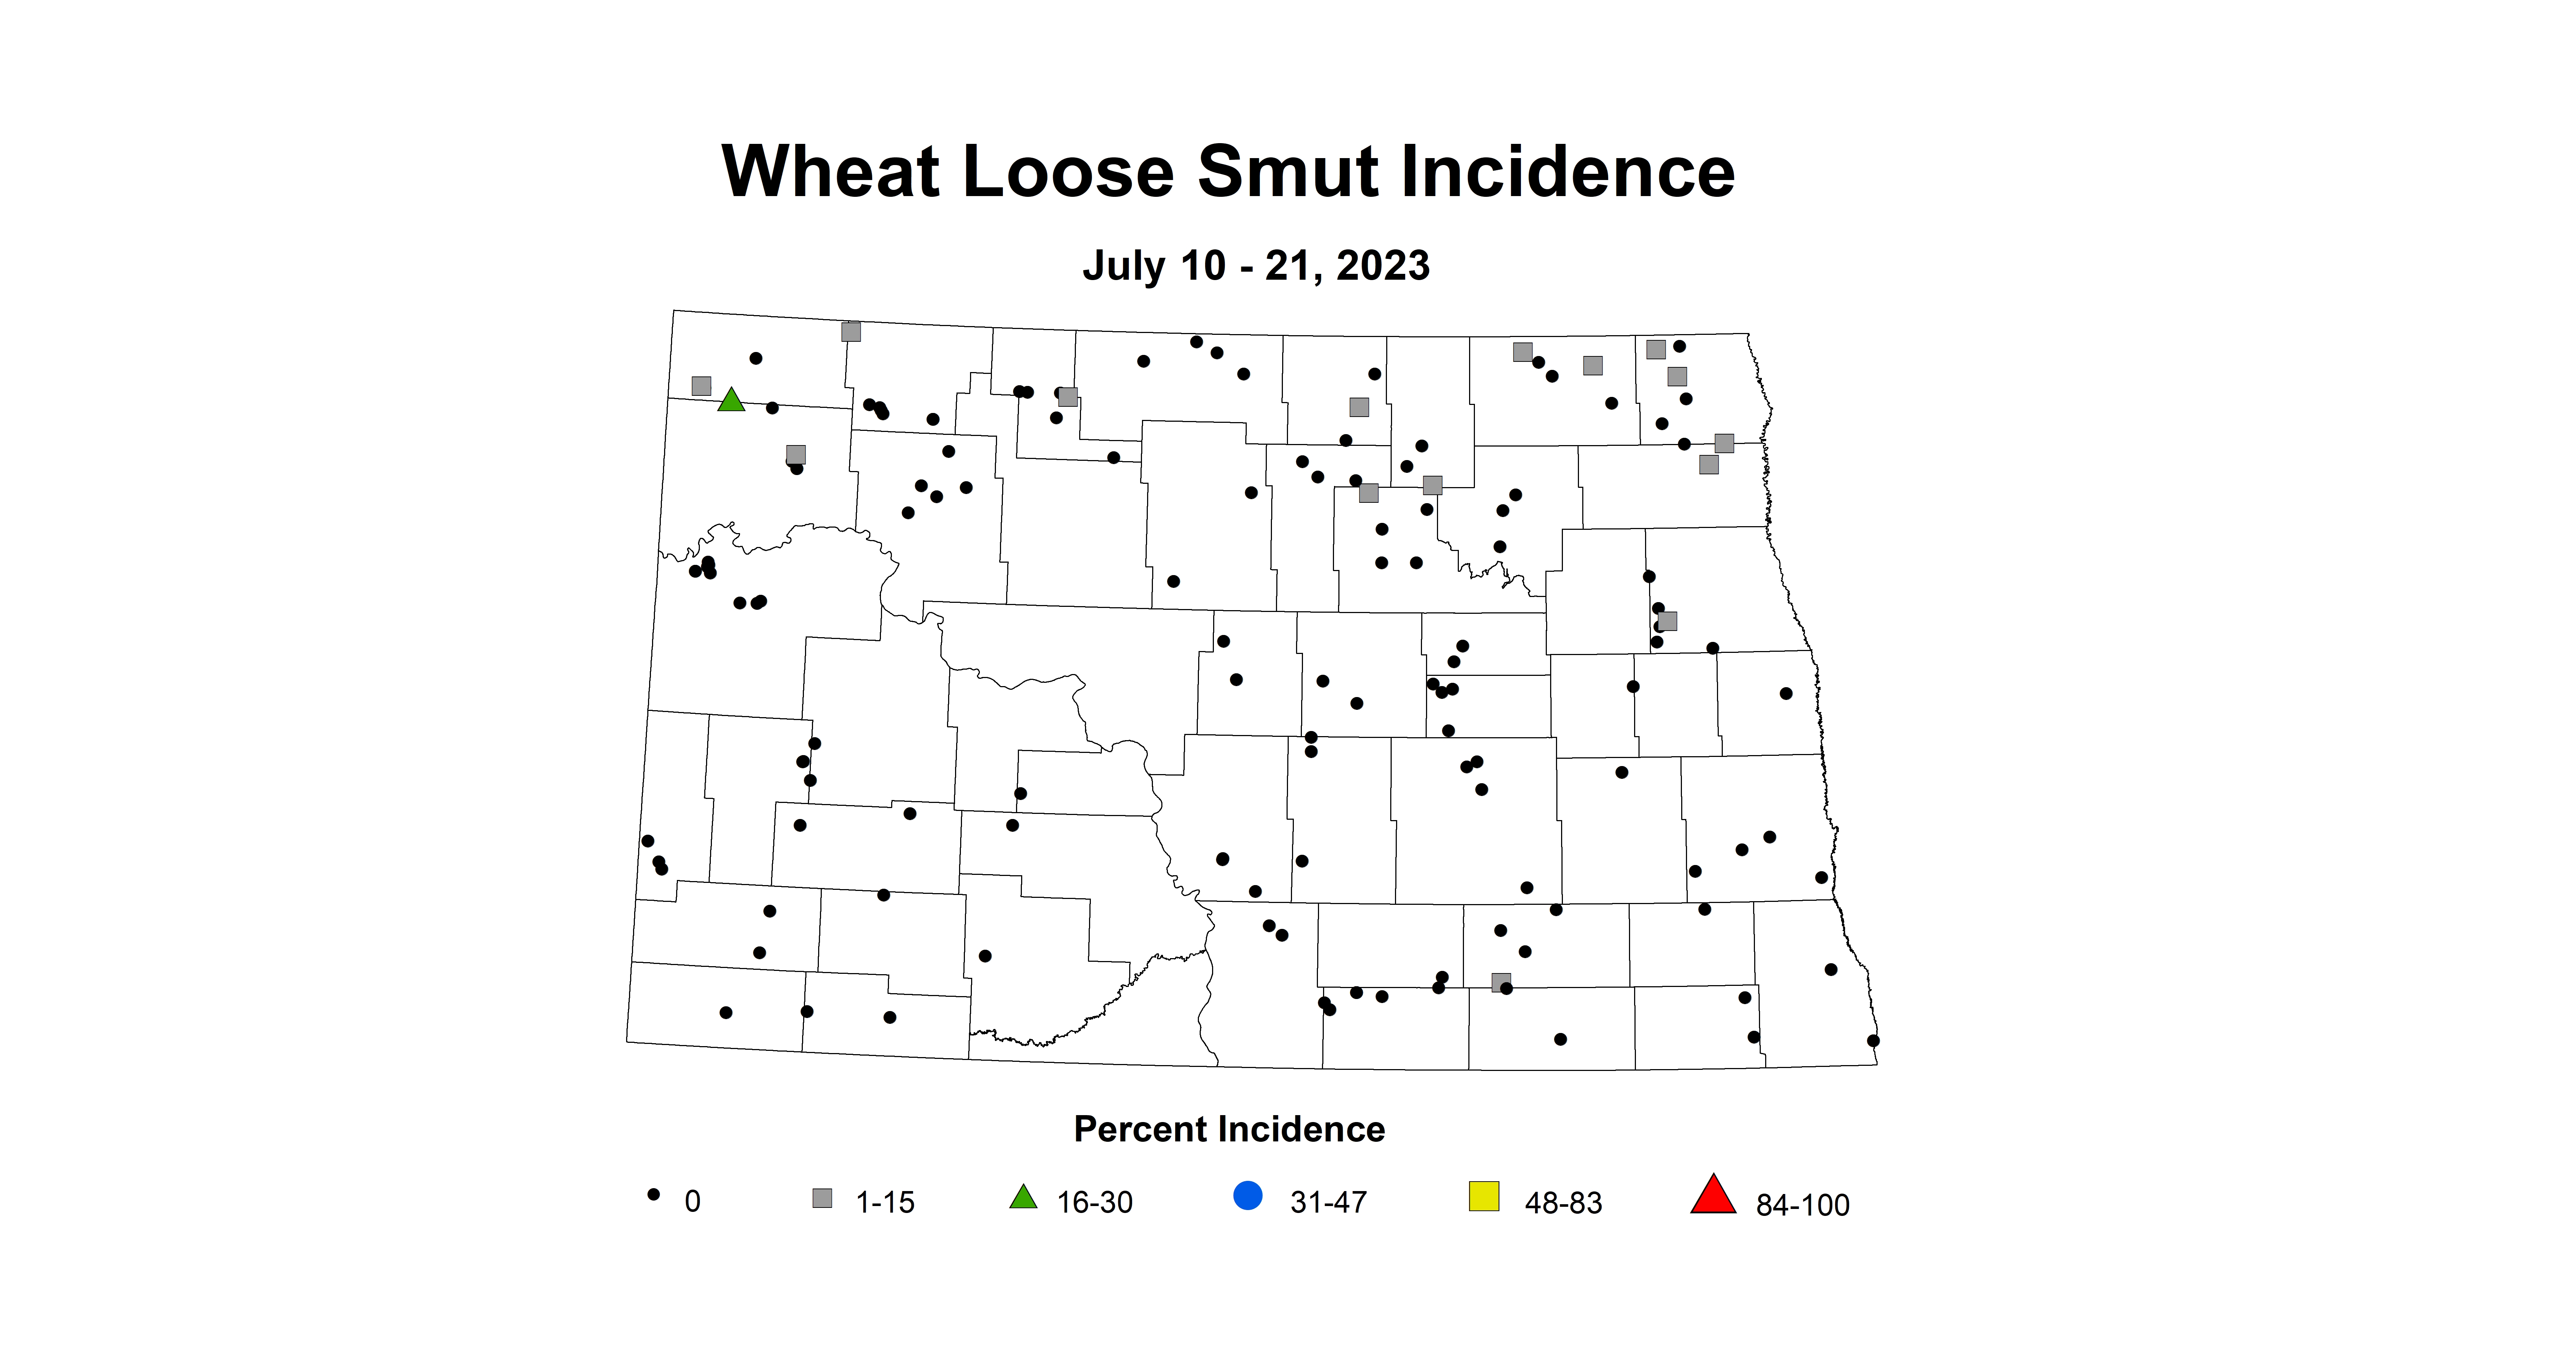 wheat loose smut incidence July 10-21 2023